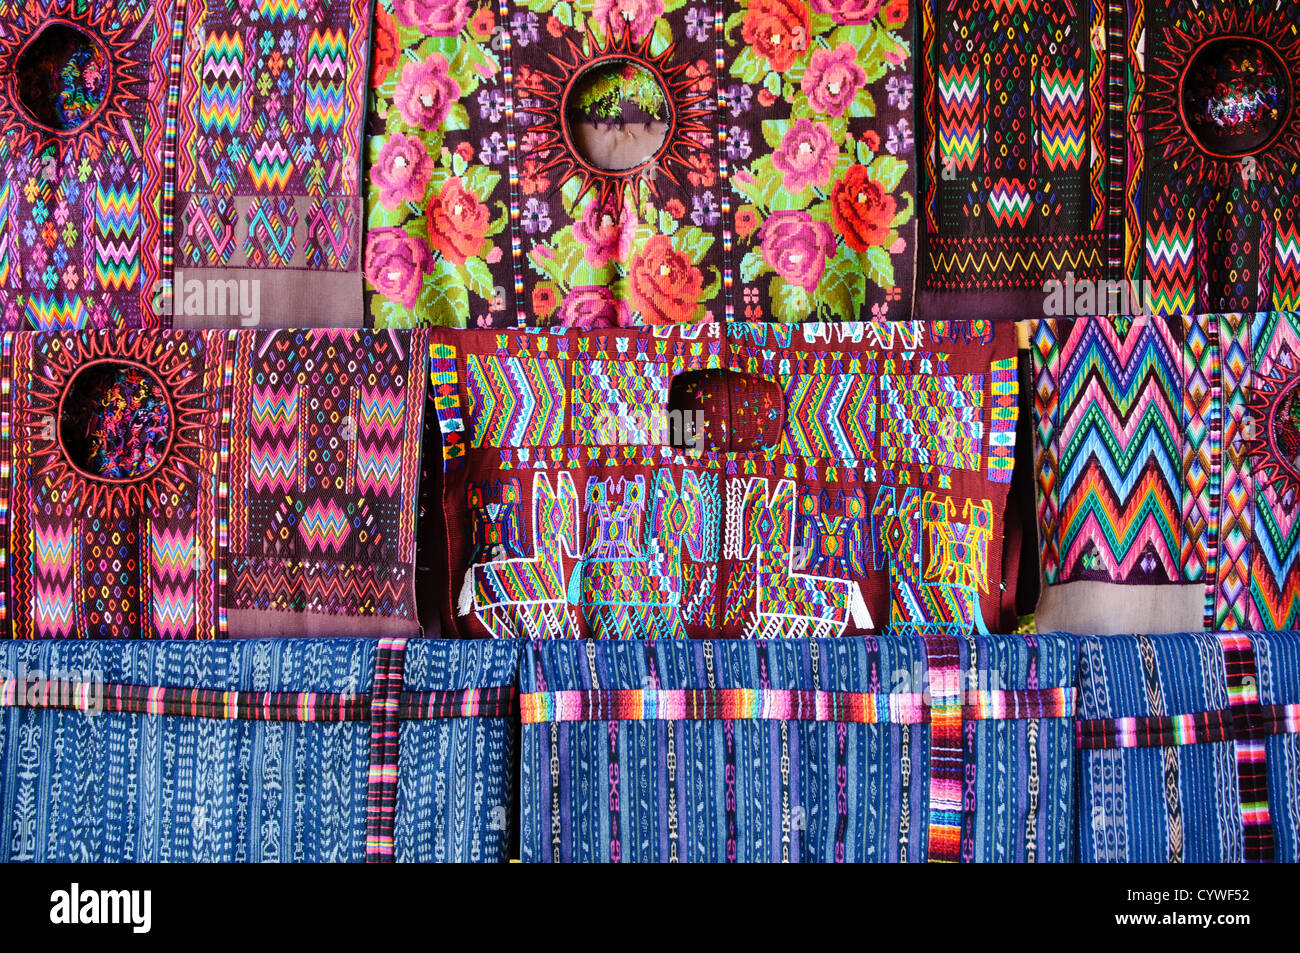 CHICHICASTENANGO, Guatemala - Traditional local woven textiles for sale at the market in Chichi. Chichicastenango is an indigenous Maya town in the Guatemalan highlands about 90 miles northwest of Guatemala City and at an elevation of nearly 6,500 feet. It is most famous for its markets on Sundays and Thursdays. Stock Photo